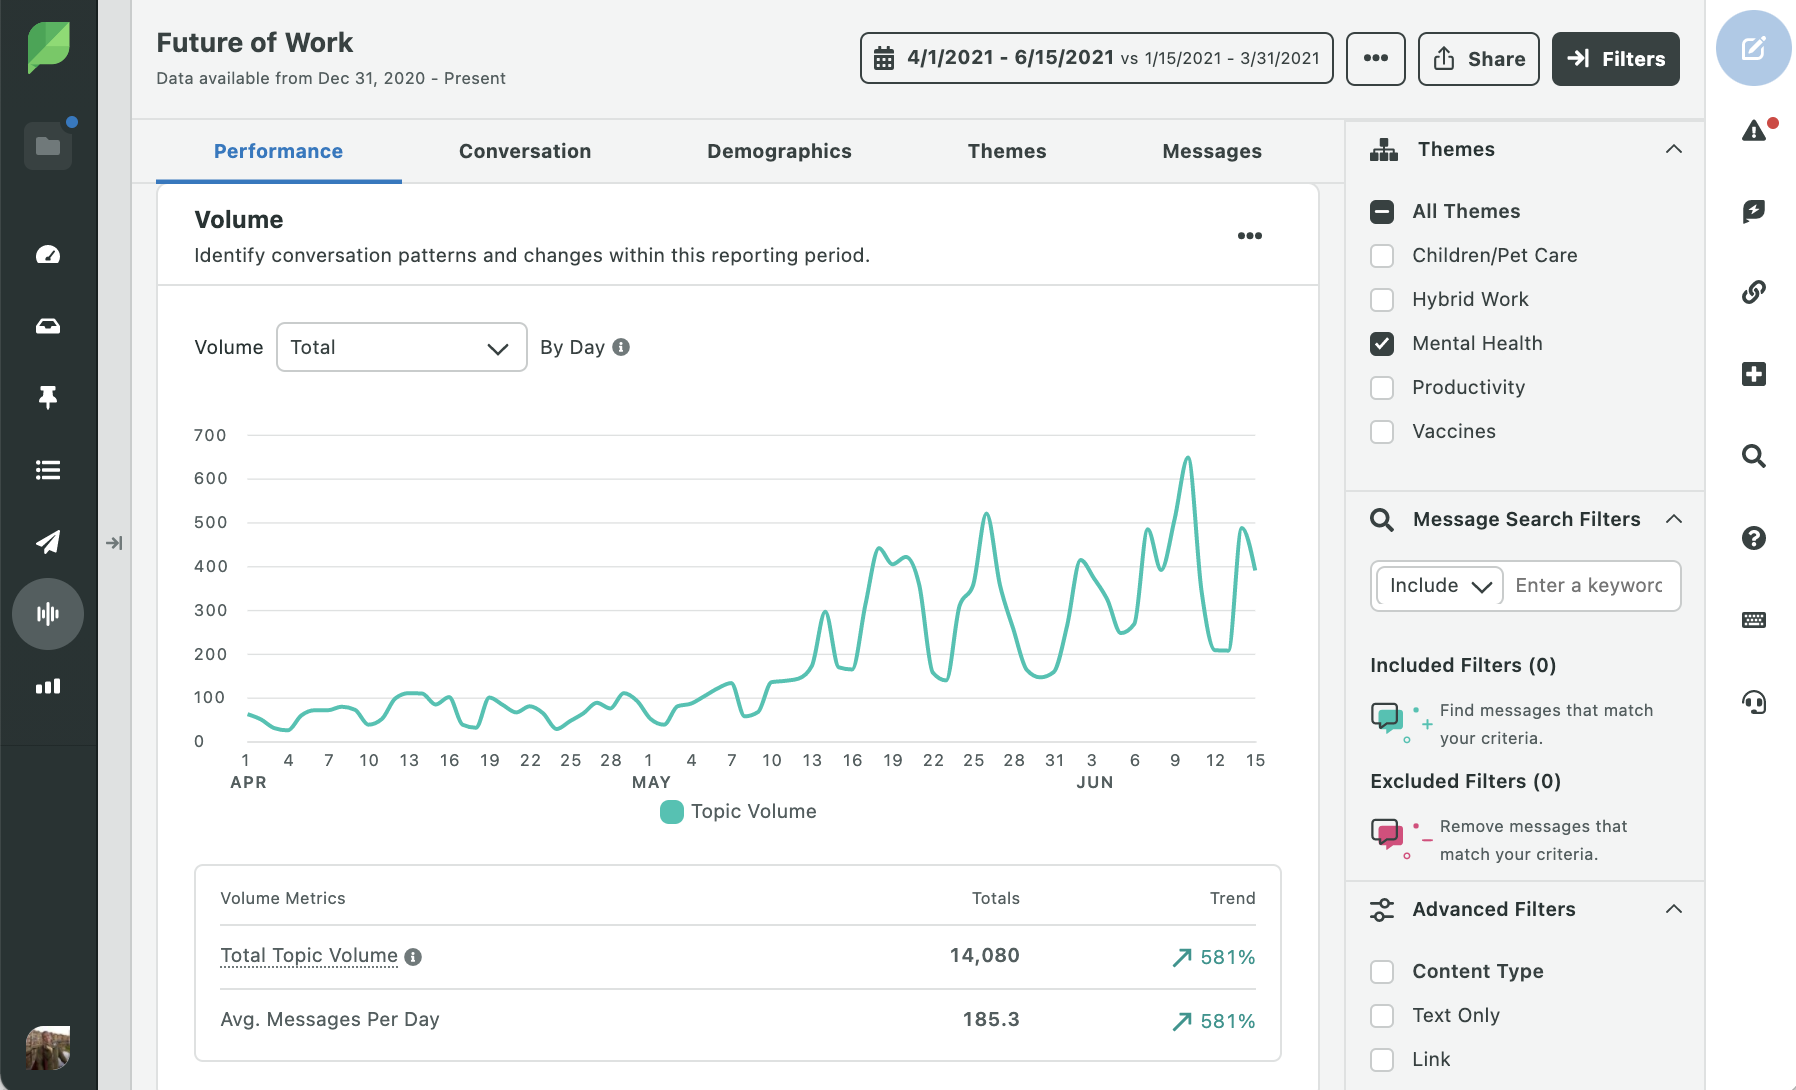 Through Sprout Social social listening feature, tracking the topic volume of the future of work